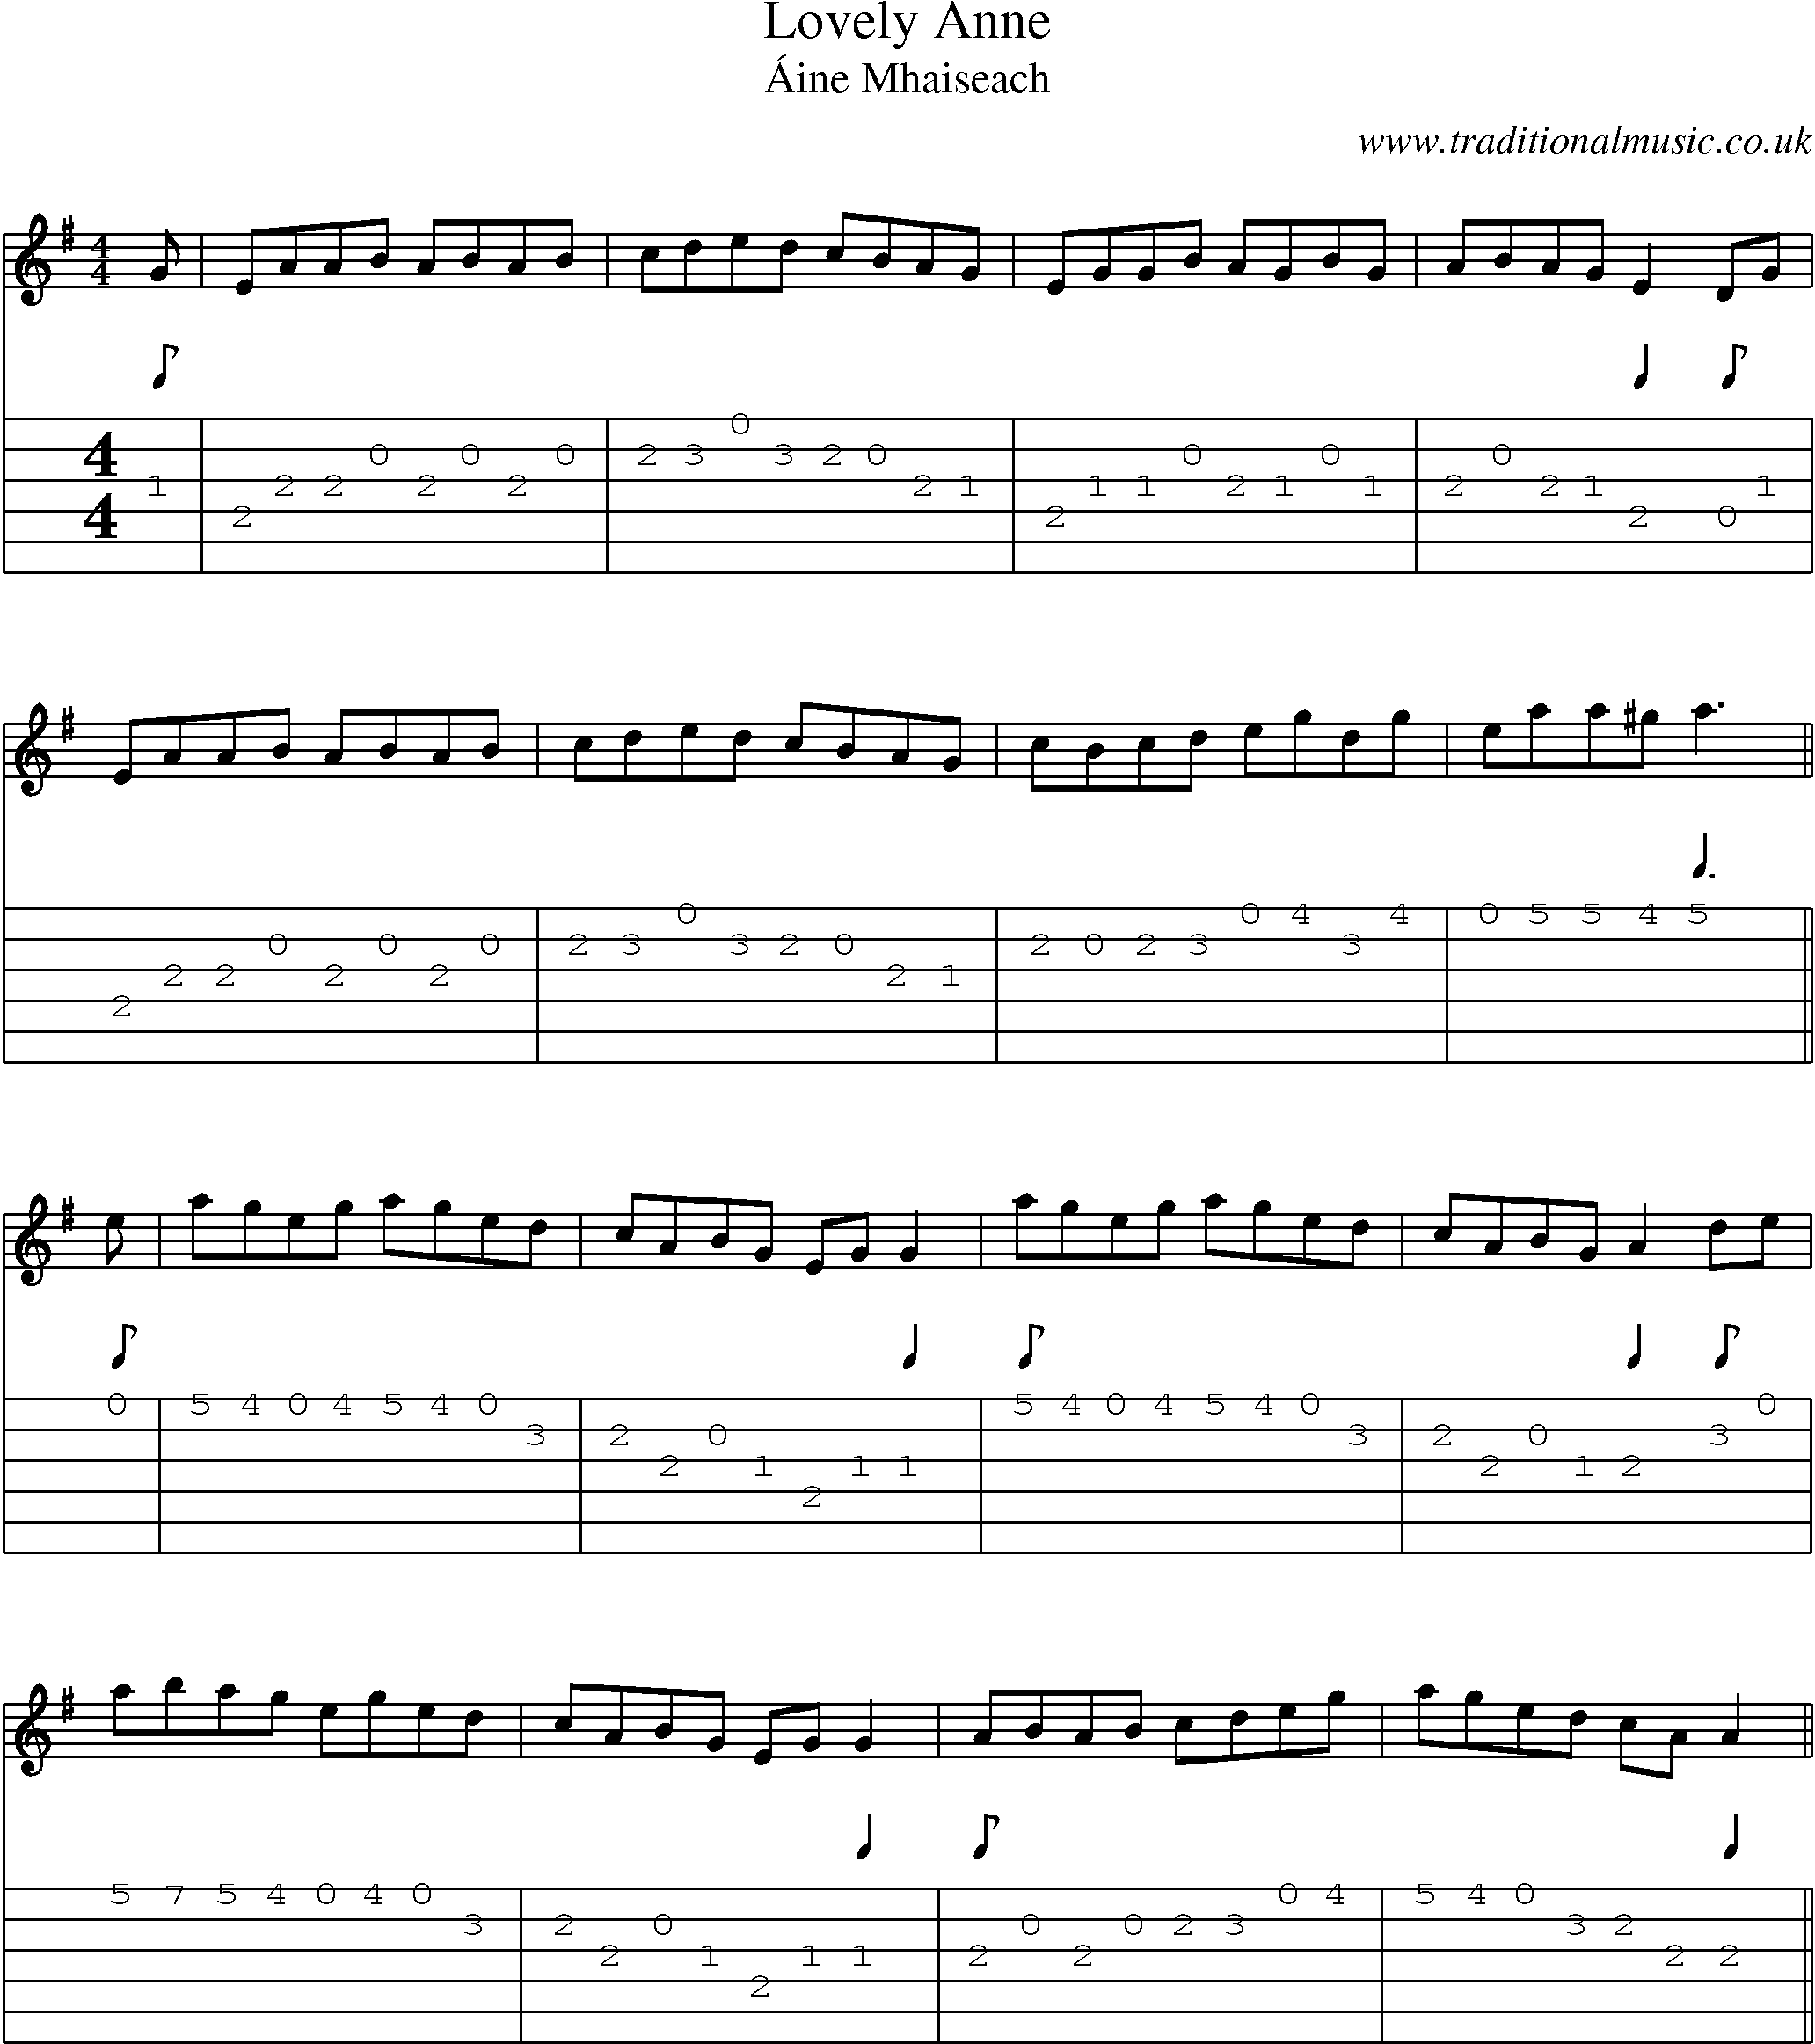 Music Score and Guitar Tabs for Lovely Anne